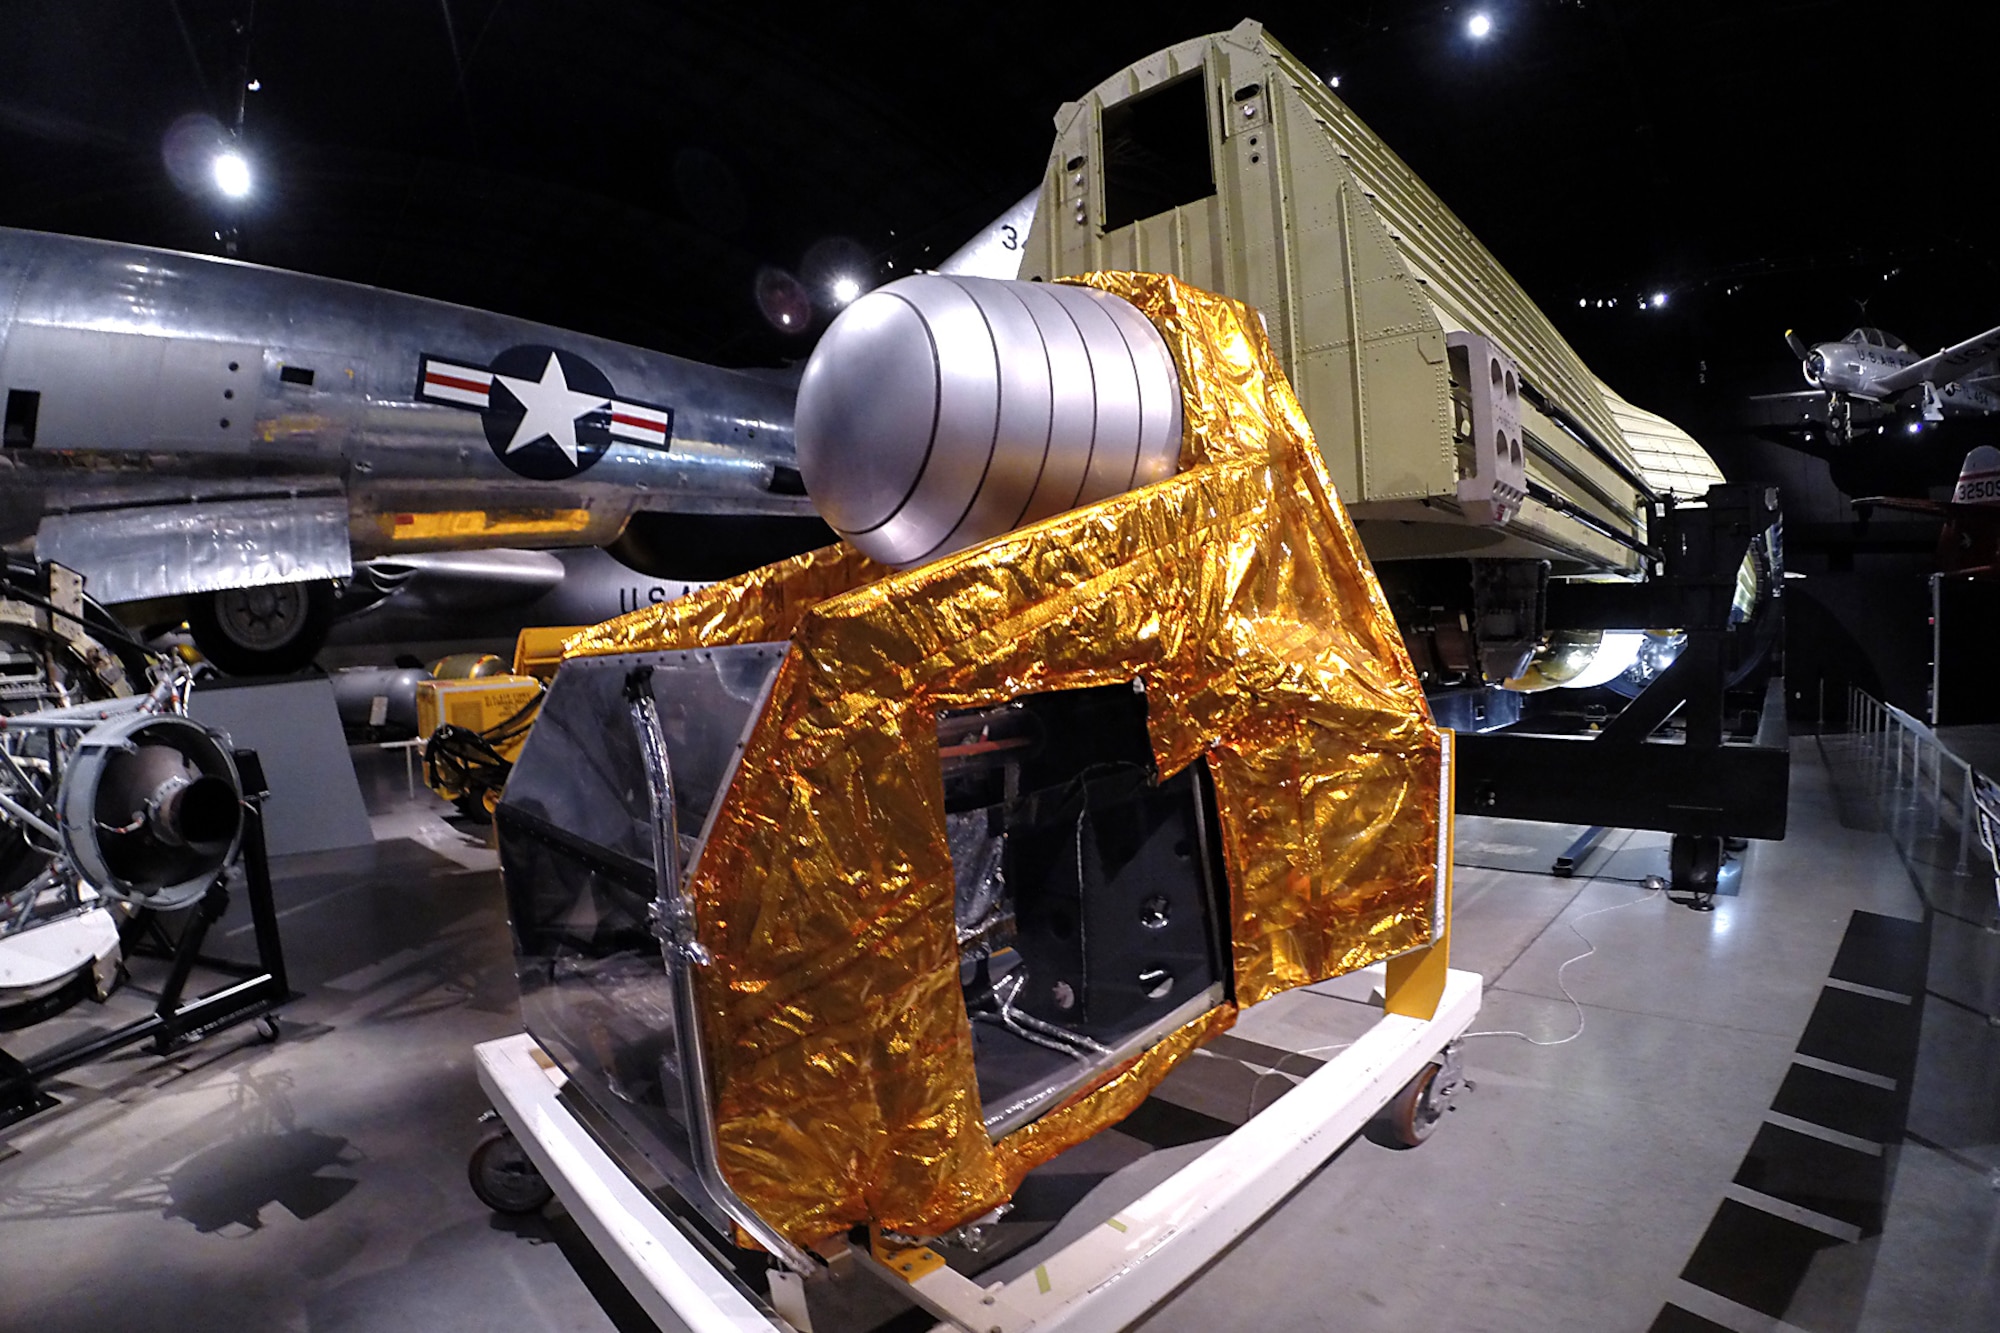 HEXAGON KH-9 reconnaissance satellite in the Cold War Gallery at the National Museum of the U.S. Air Force. (U.S. Air Force Photo)
